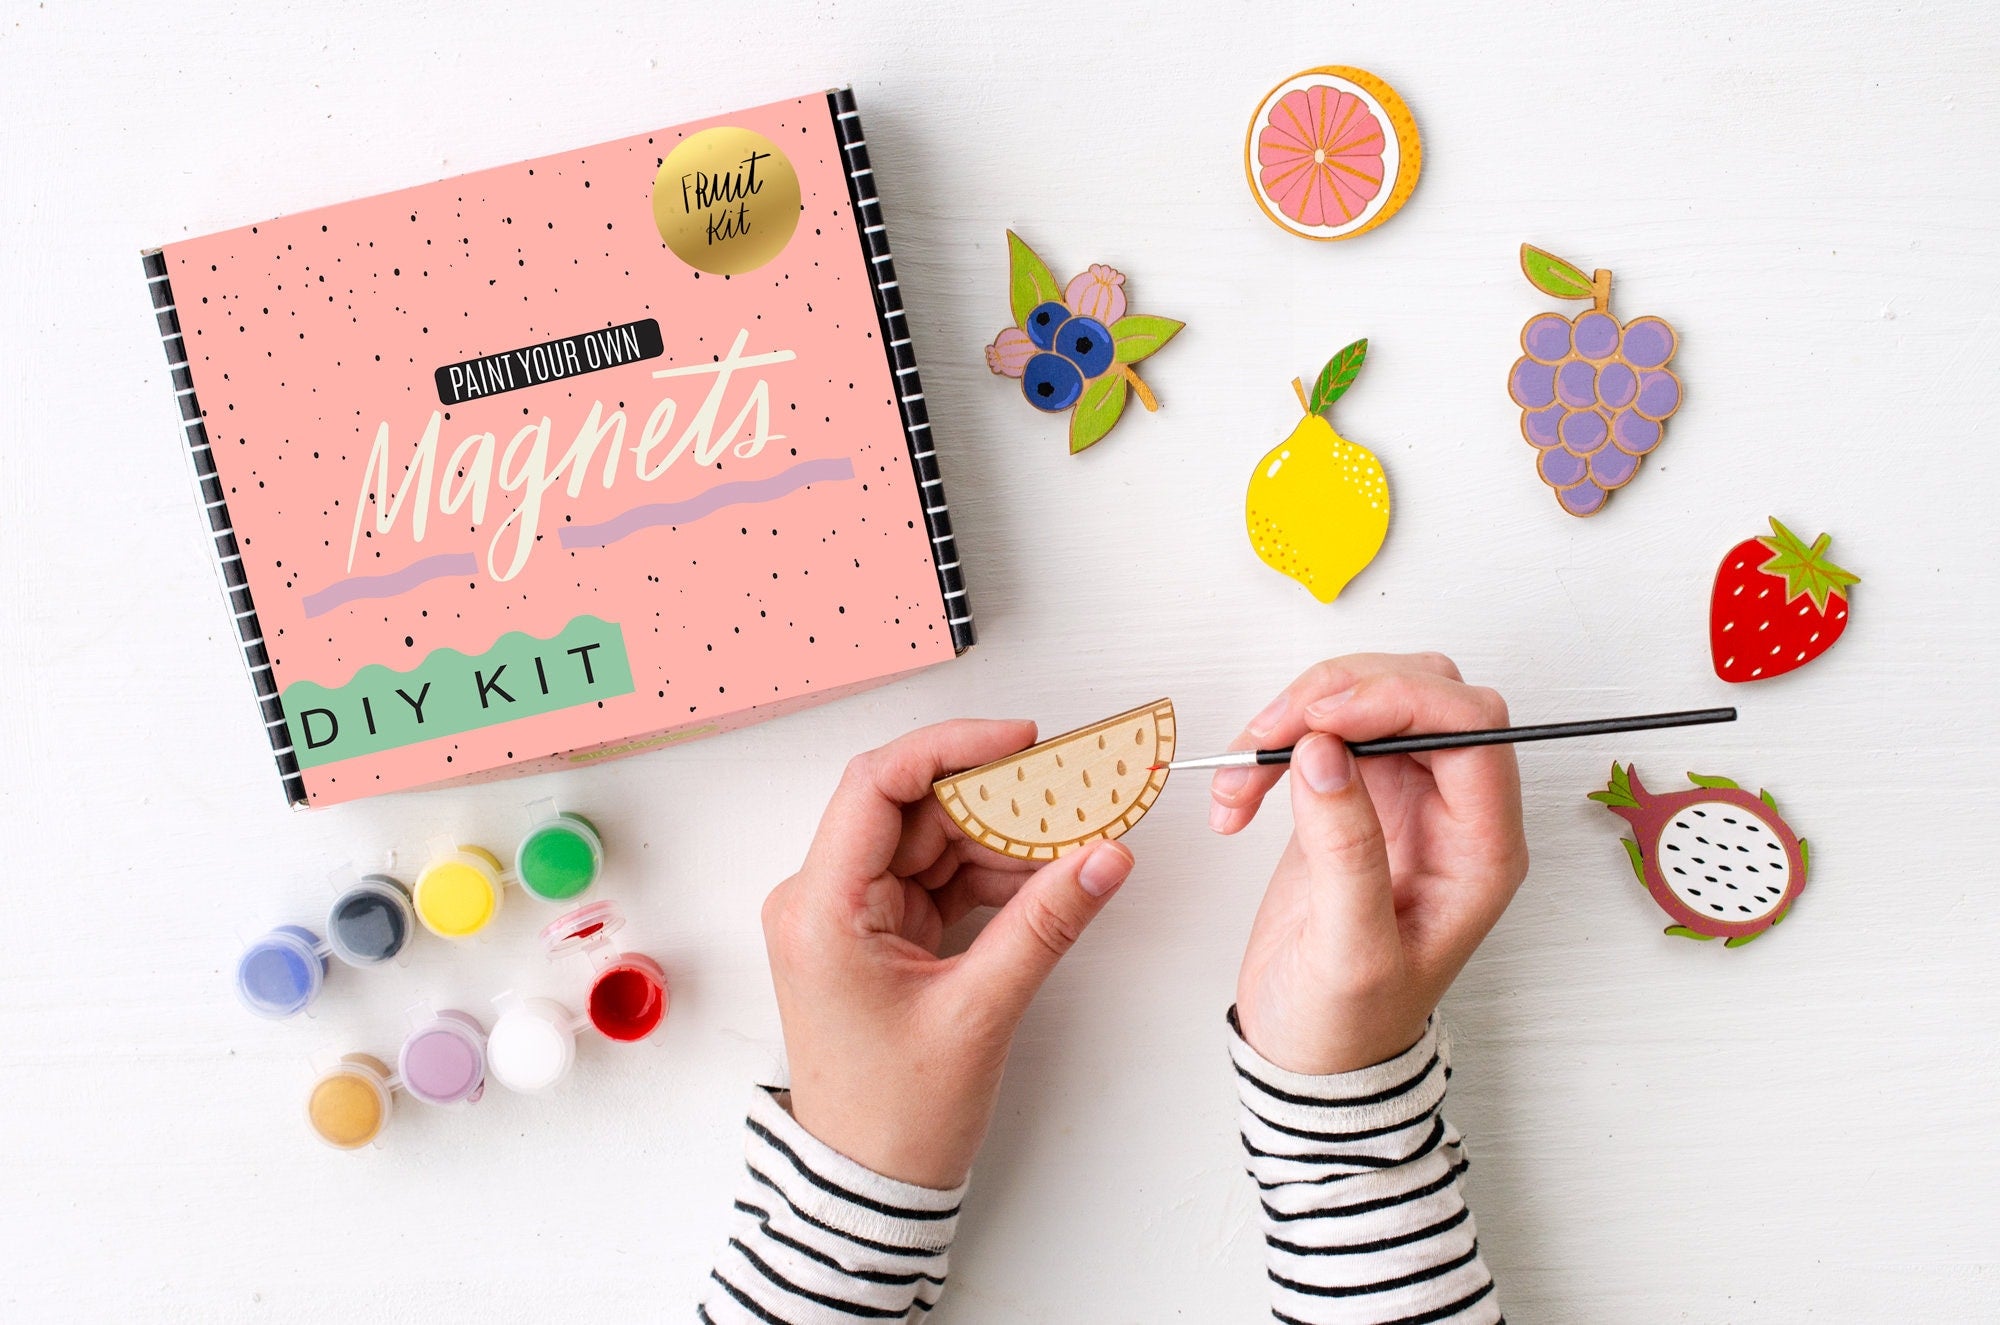 DIY Kit Paint Your Own Magnet kit, craft kit, party kit, stay at